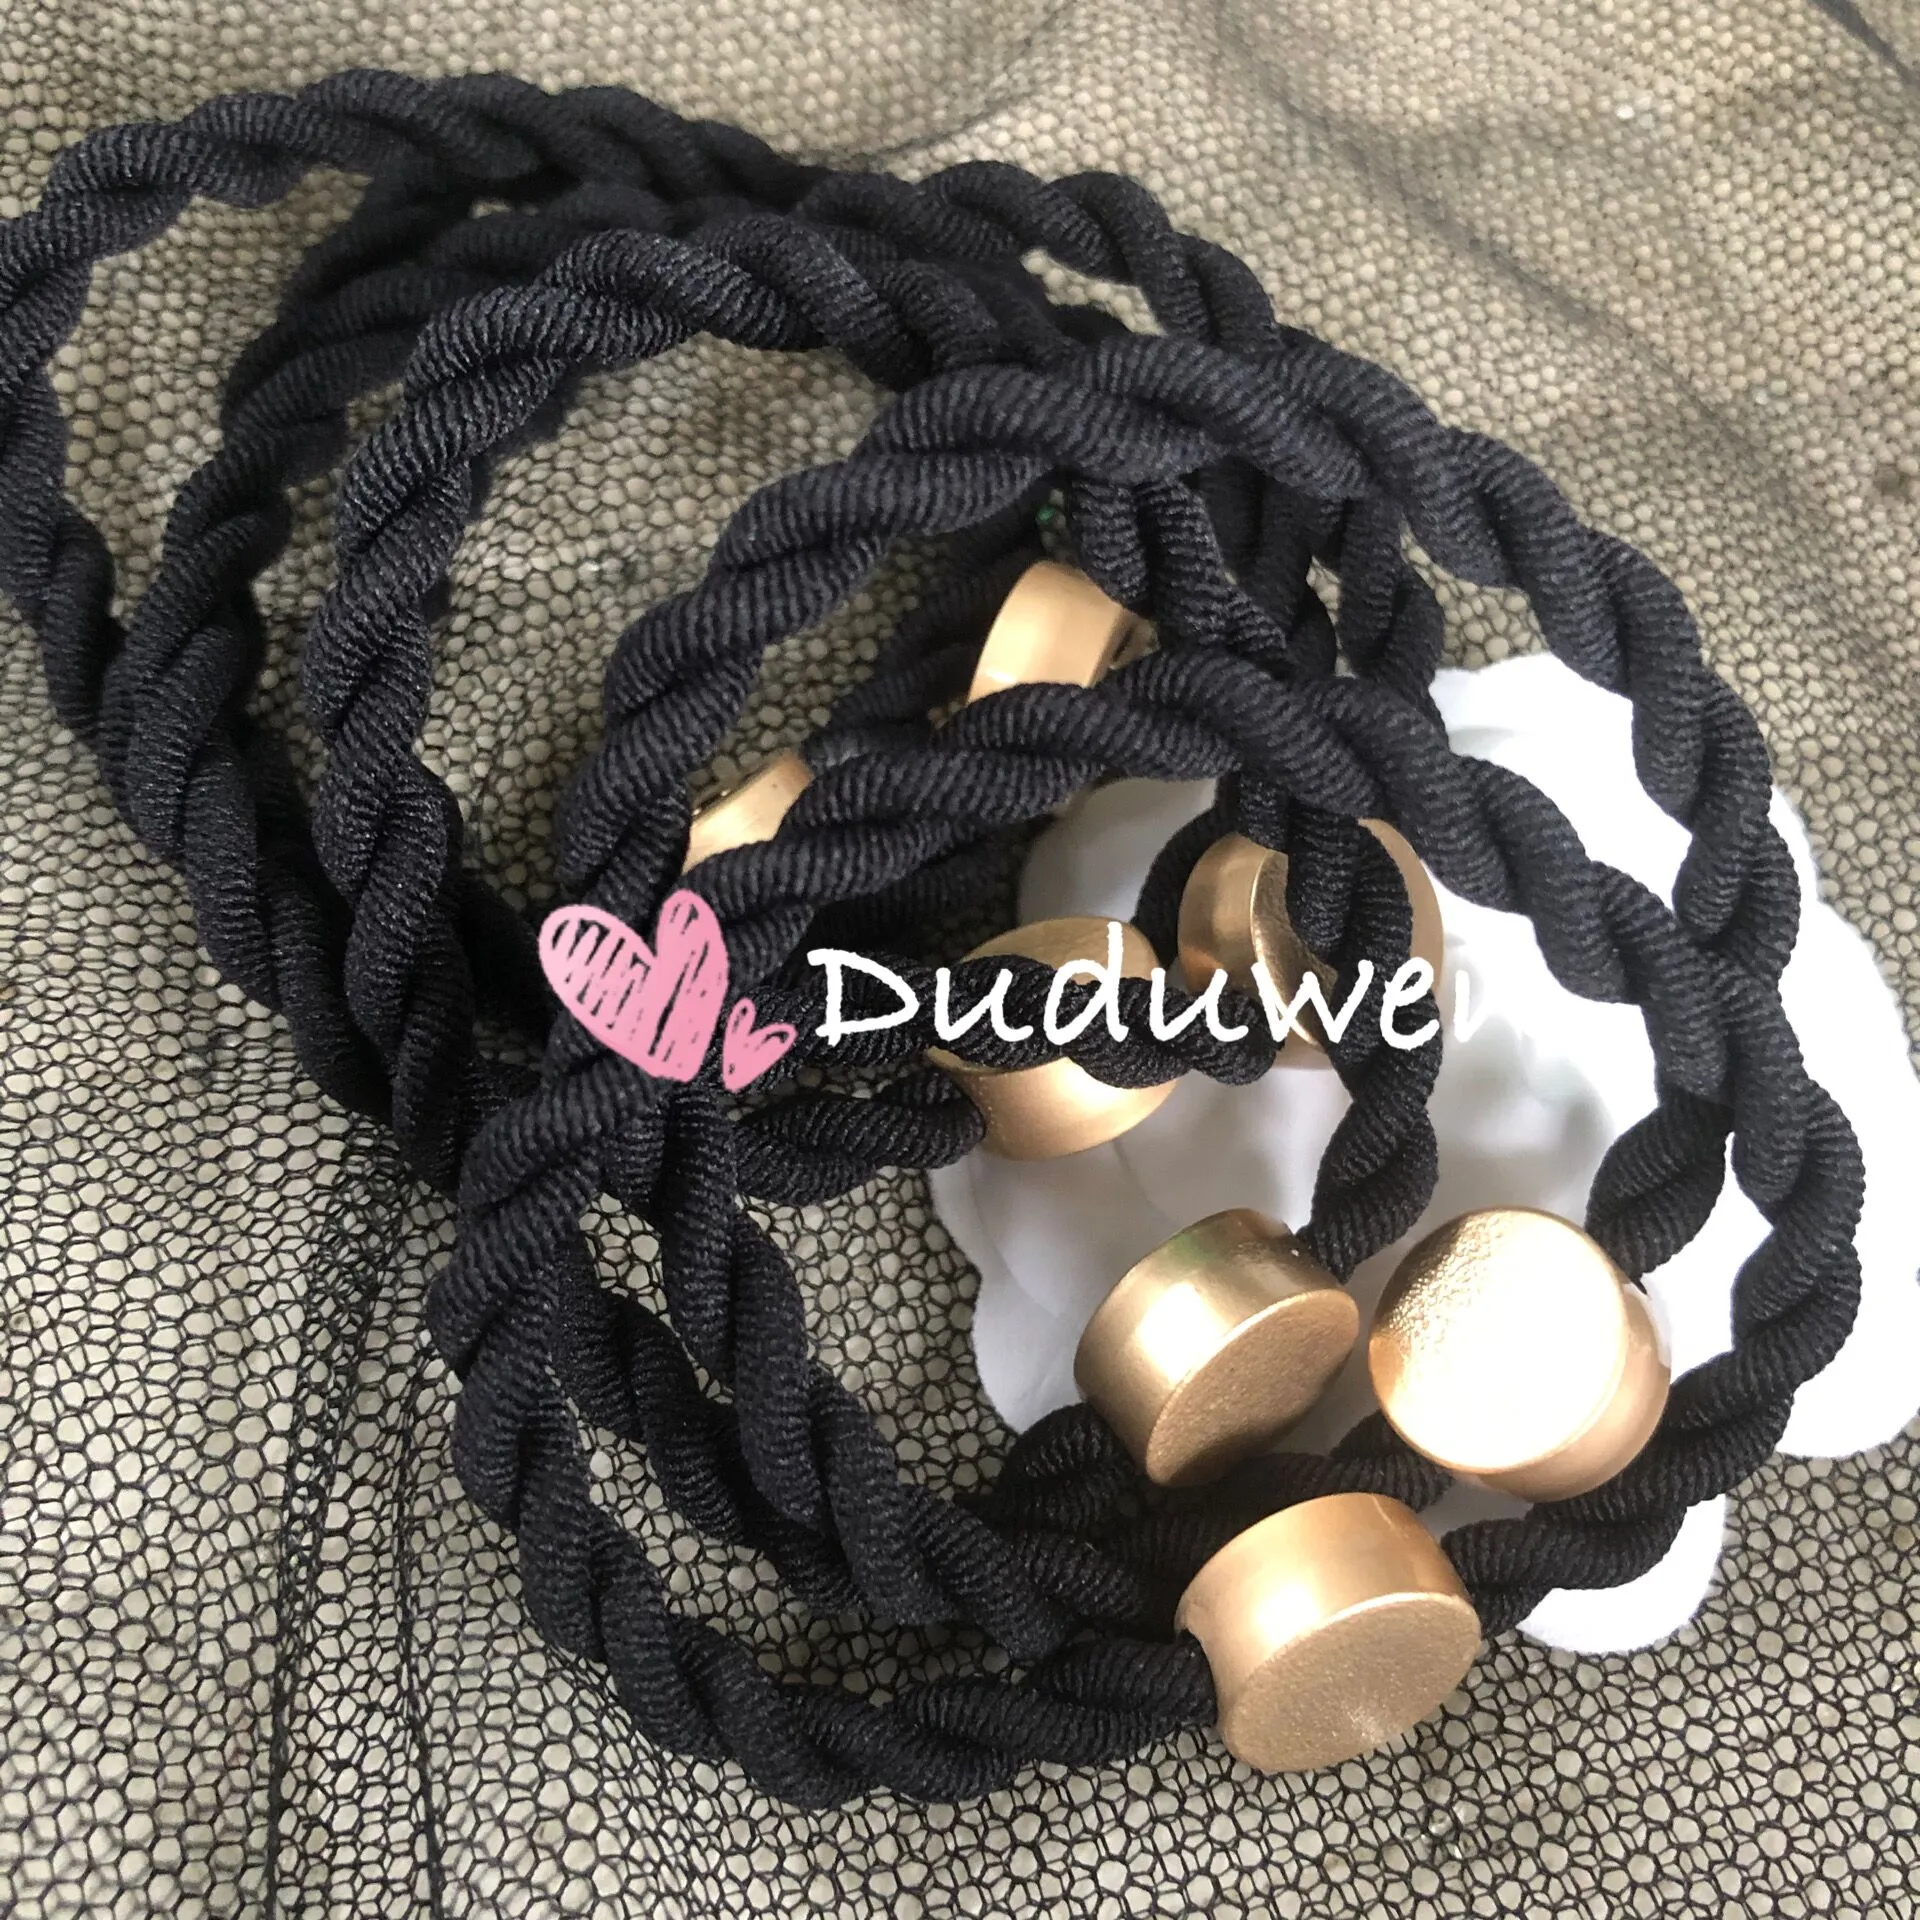 Ealstic Head Band Round Dot Incised 2C Elasitc Bands Fashion Hairtie Classic Braid Hair Rope C Collection Accessori usa come Braccia